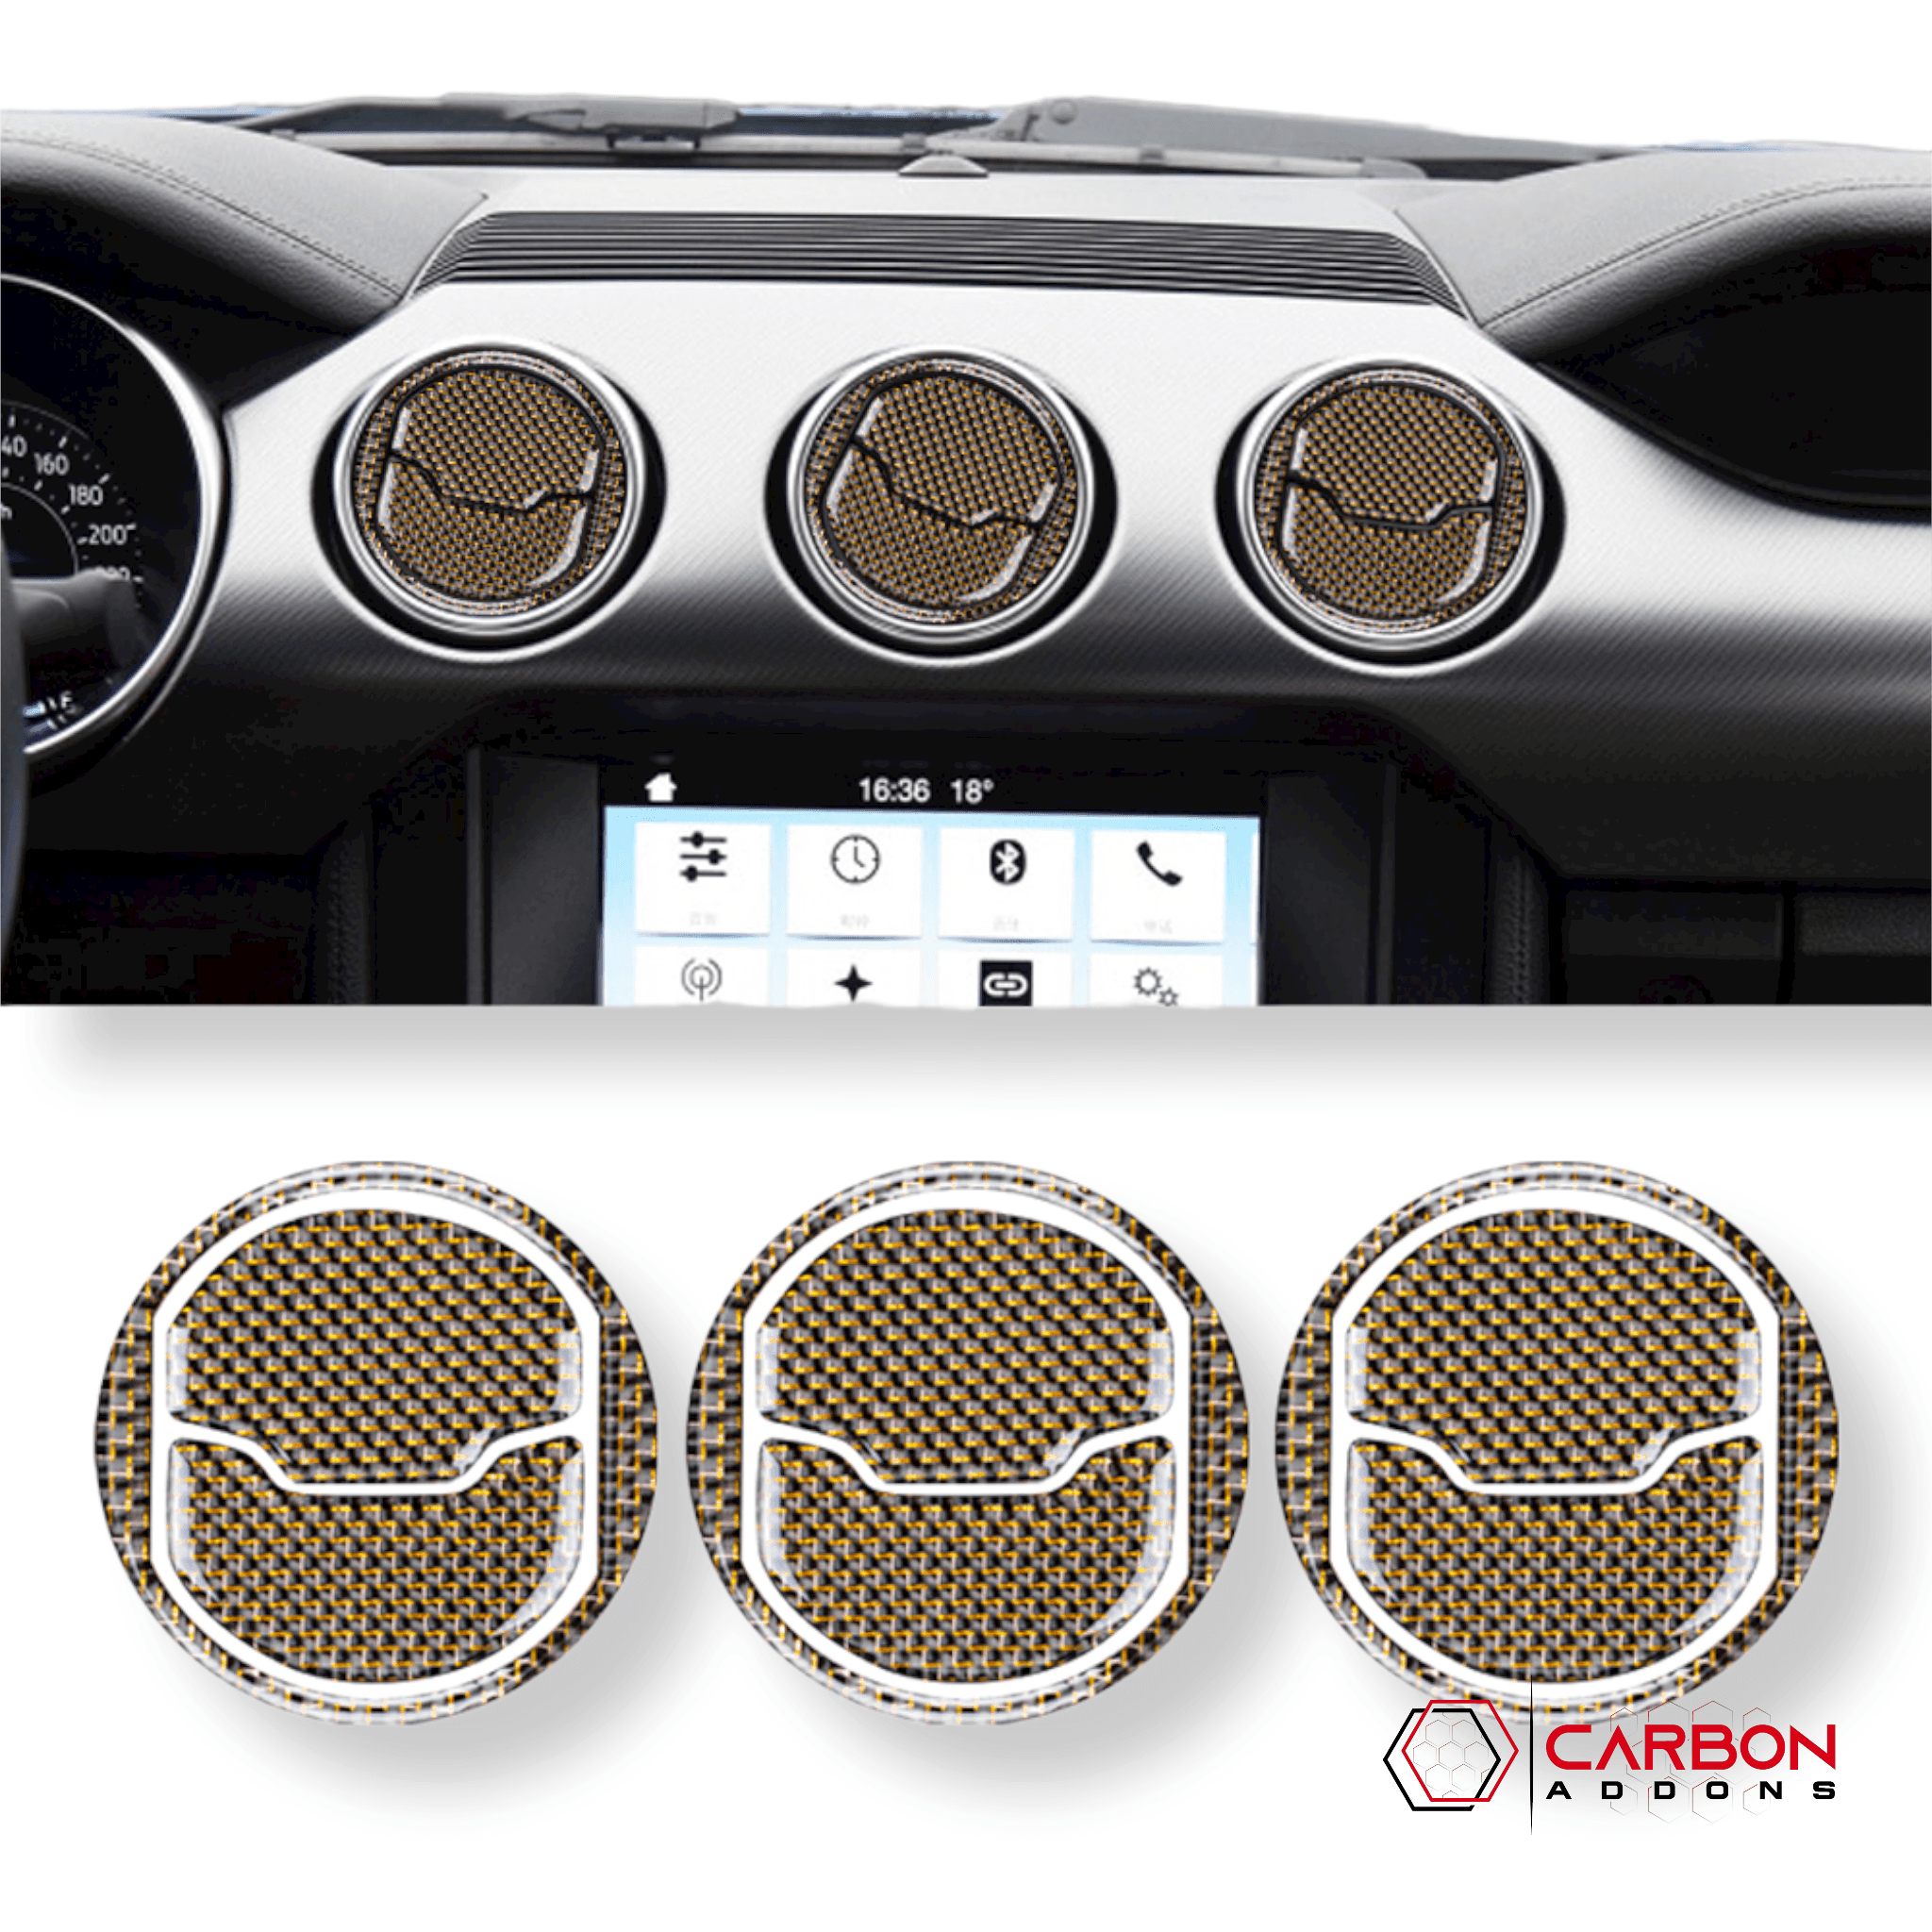 Reflective Carbon Fiber Center Air Vent Outlet Trim Overlay for Ford Mustang 2015-2023 - carbonaddons Carbon Fiber Parts, Accessories, Upgrades, Mods